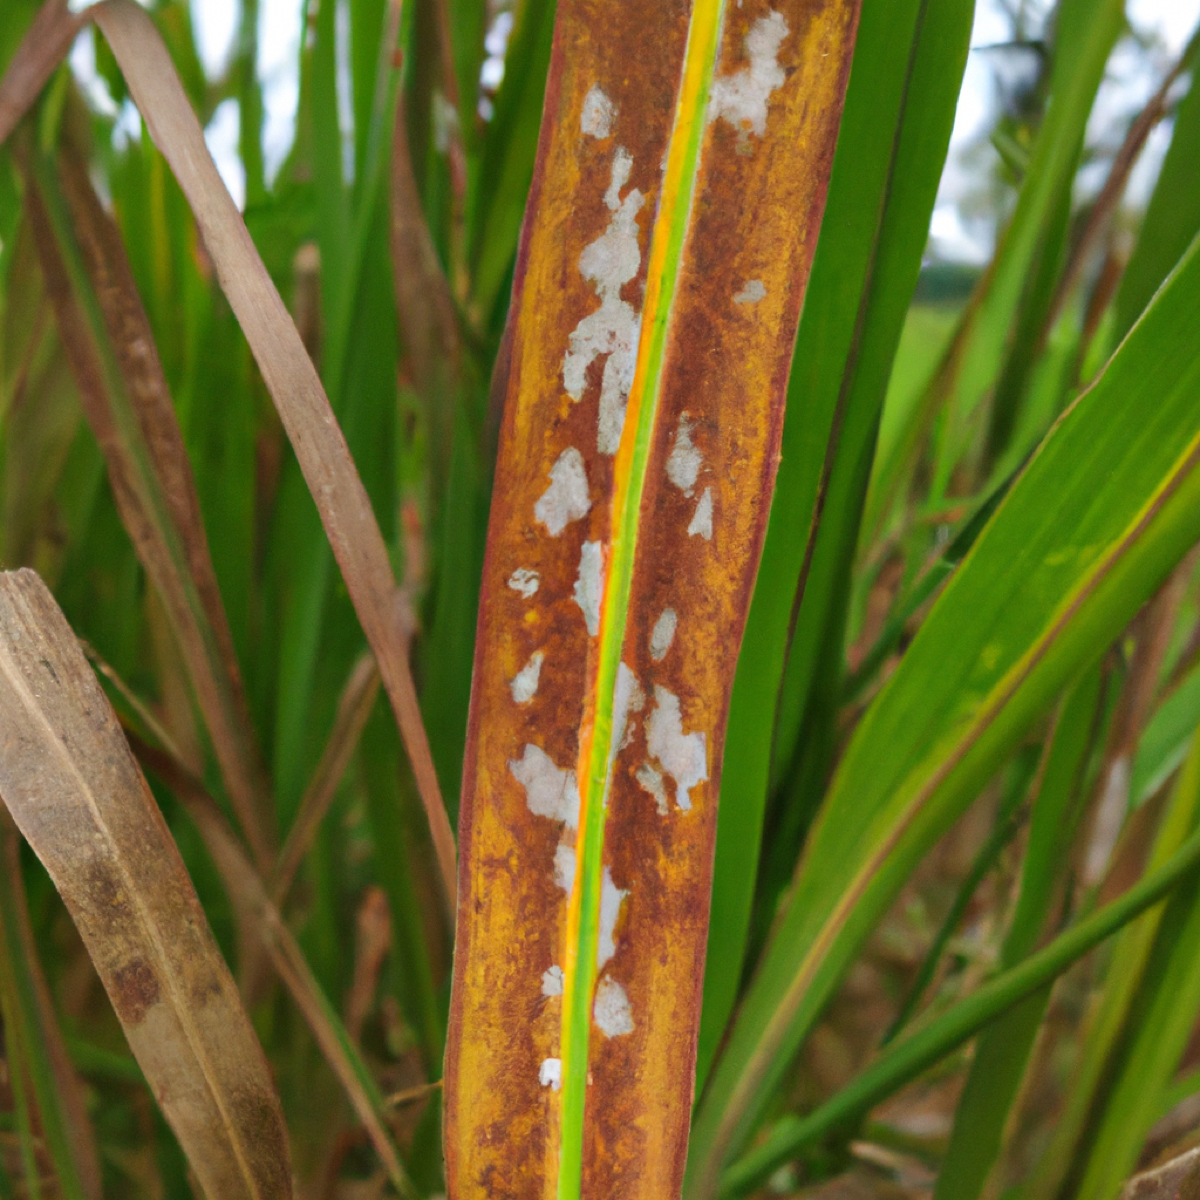 Bacterial Leaf Blight Issuet in Paddy